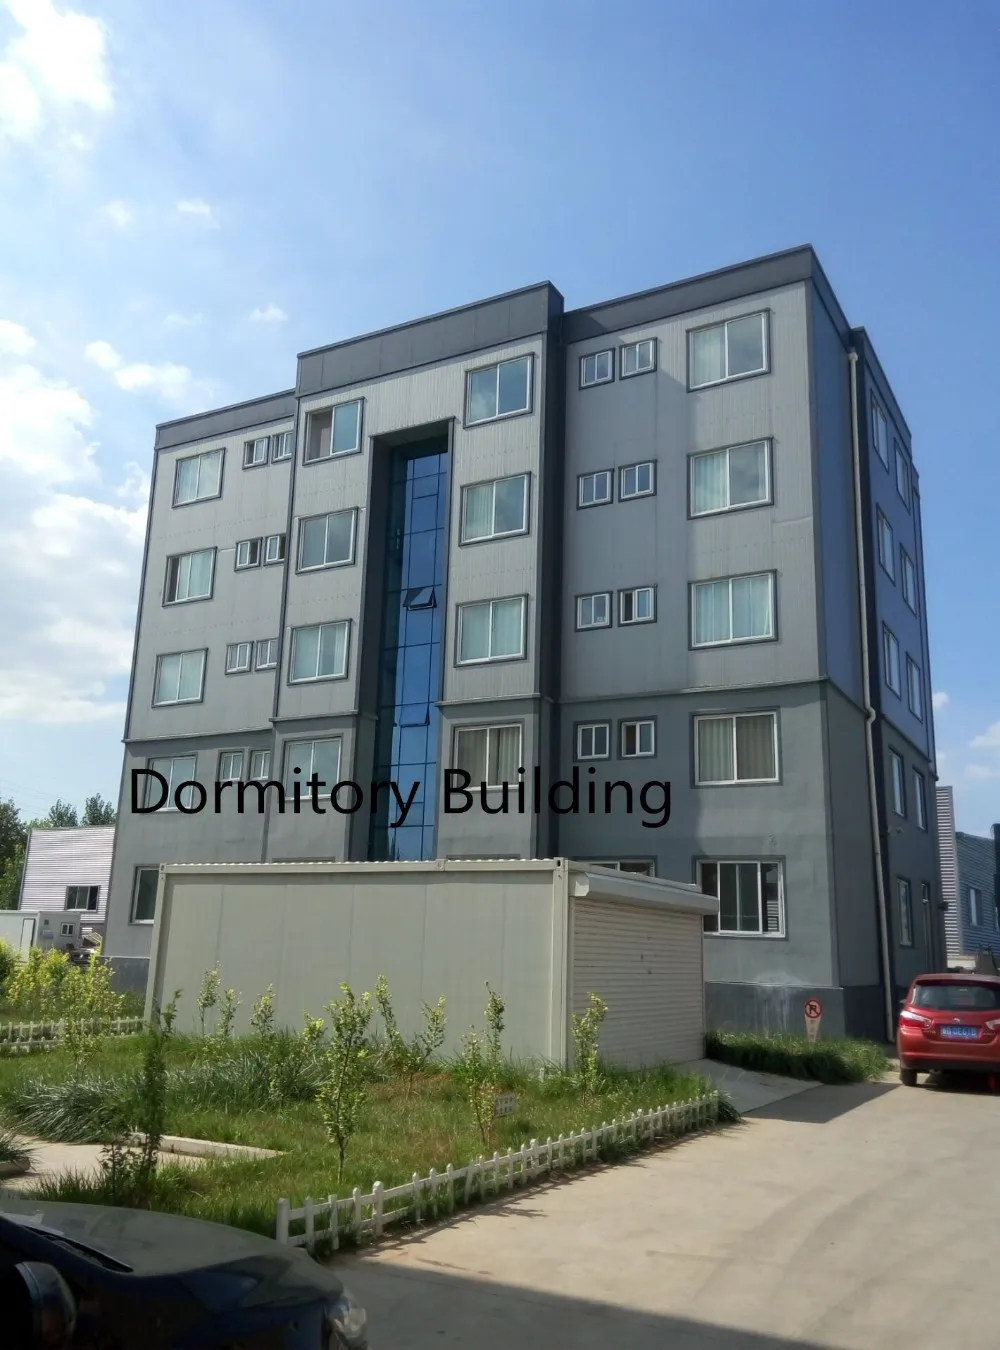 prefabricated light building steel structural prefab metal apartments